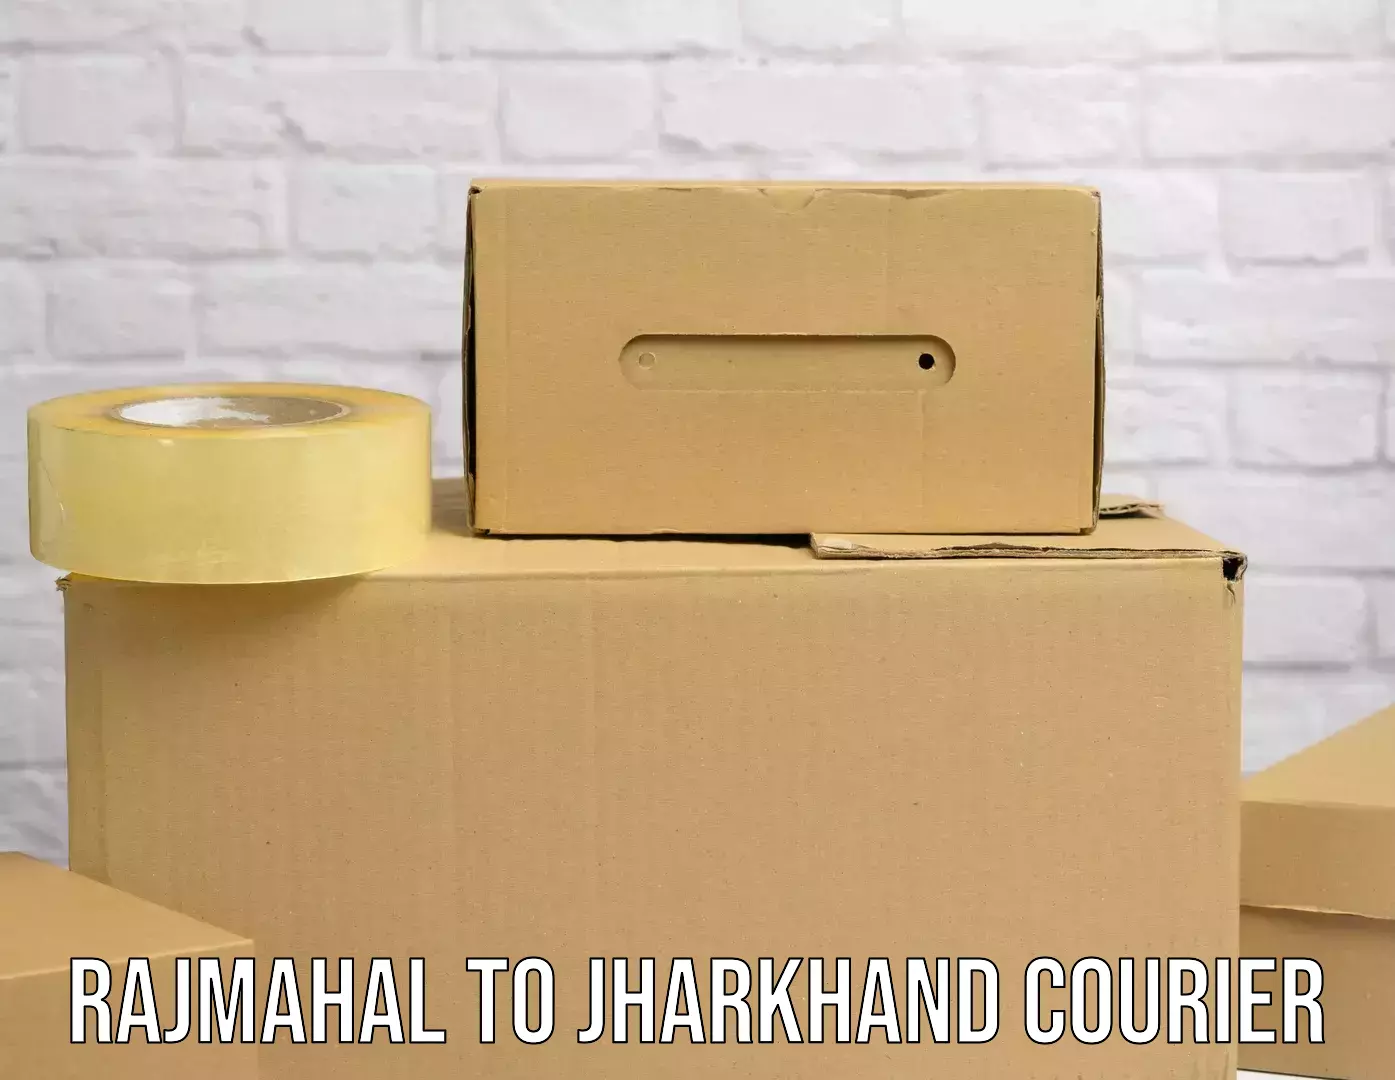 Express delivery solutions Rajmahal to Dhanbad